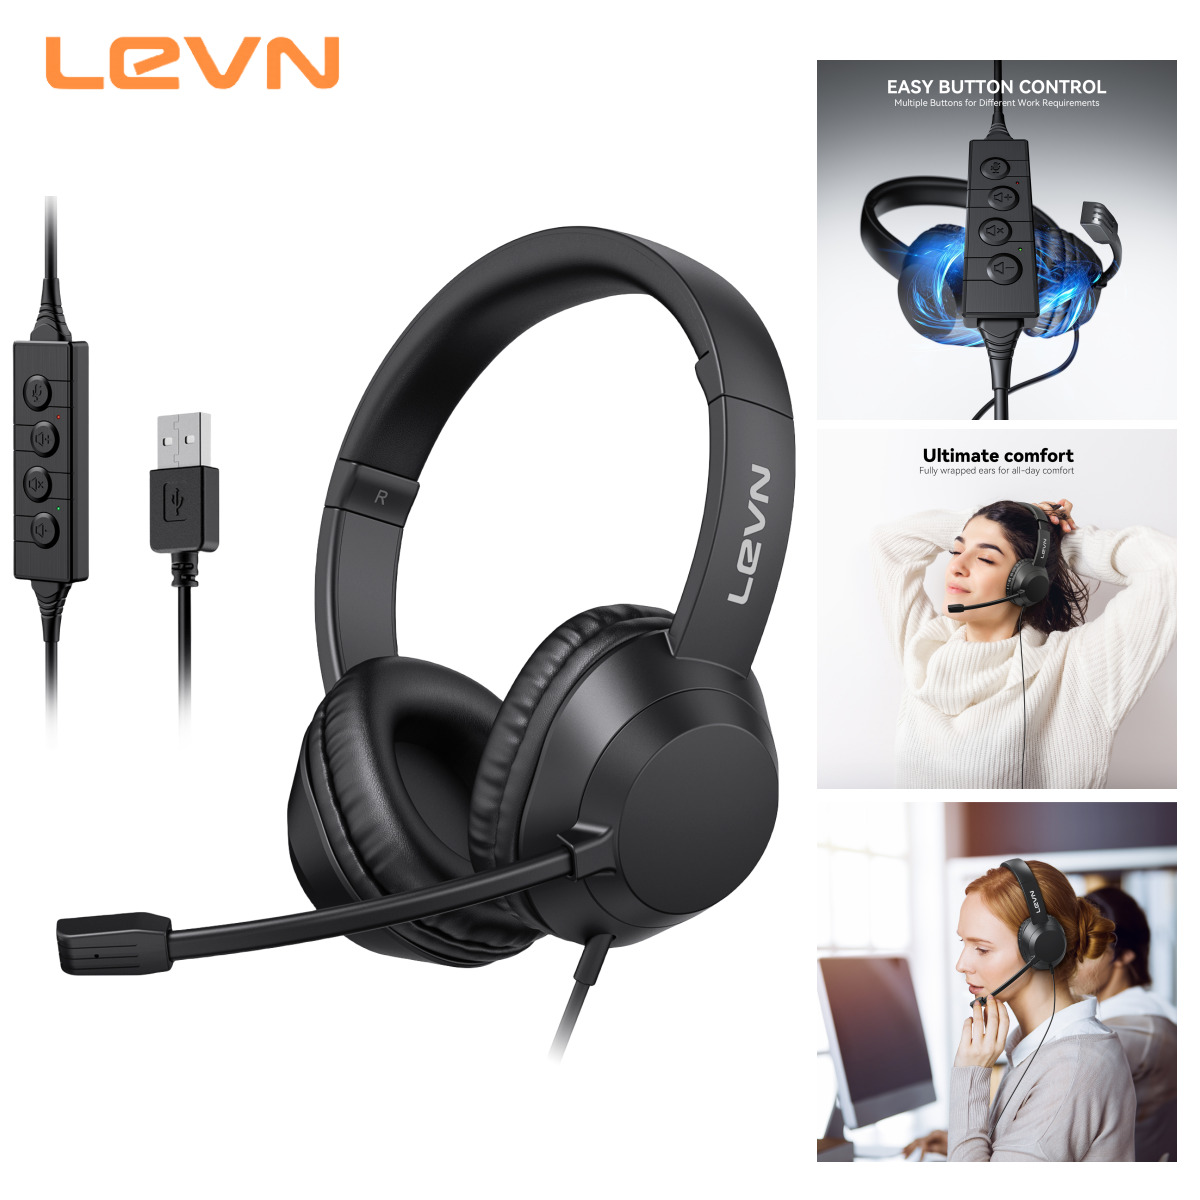 LEVN Wired Headset, Computer Headset with Noise Cancelling Micr For Laptop PC